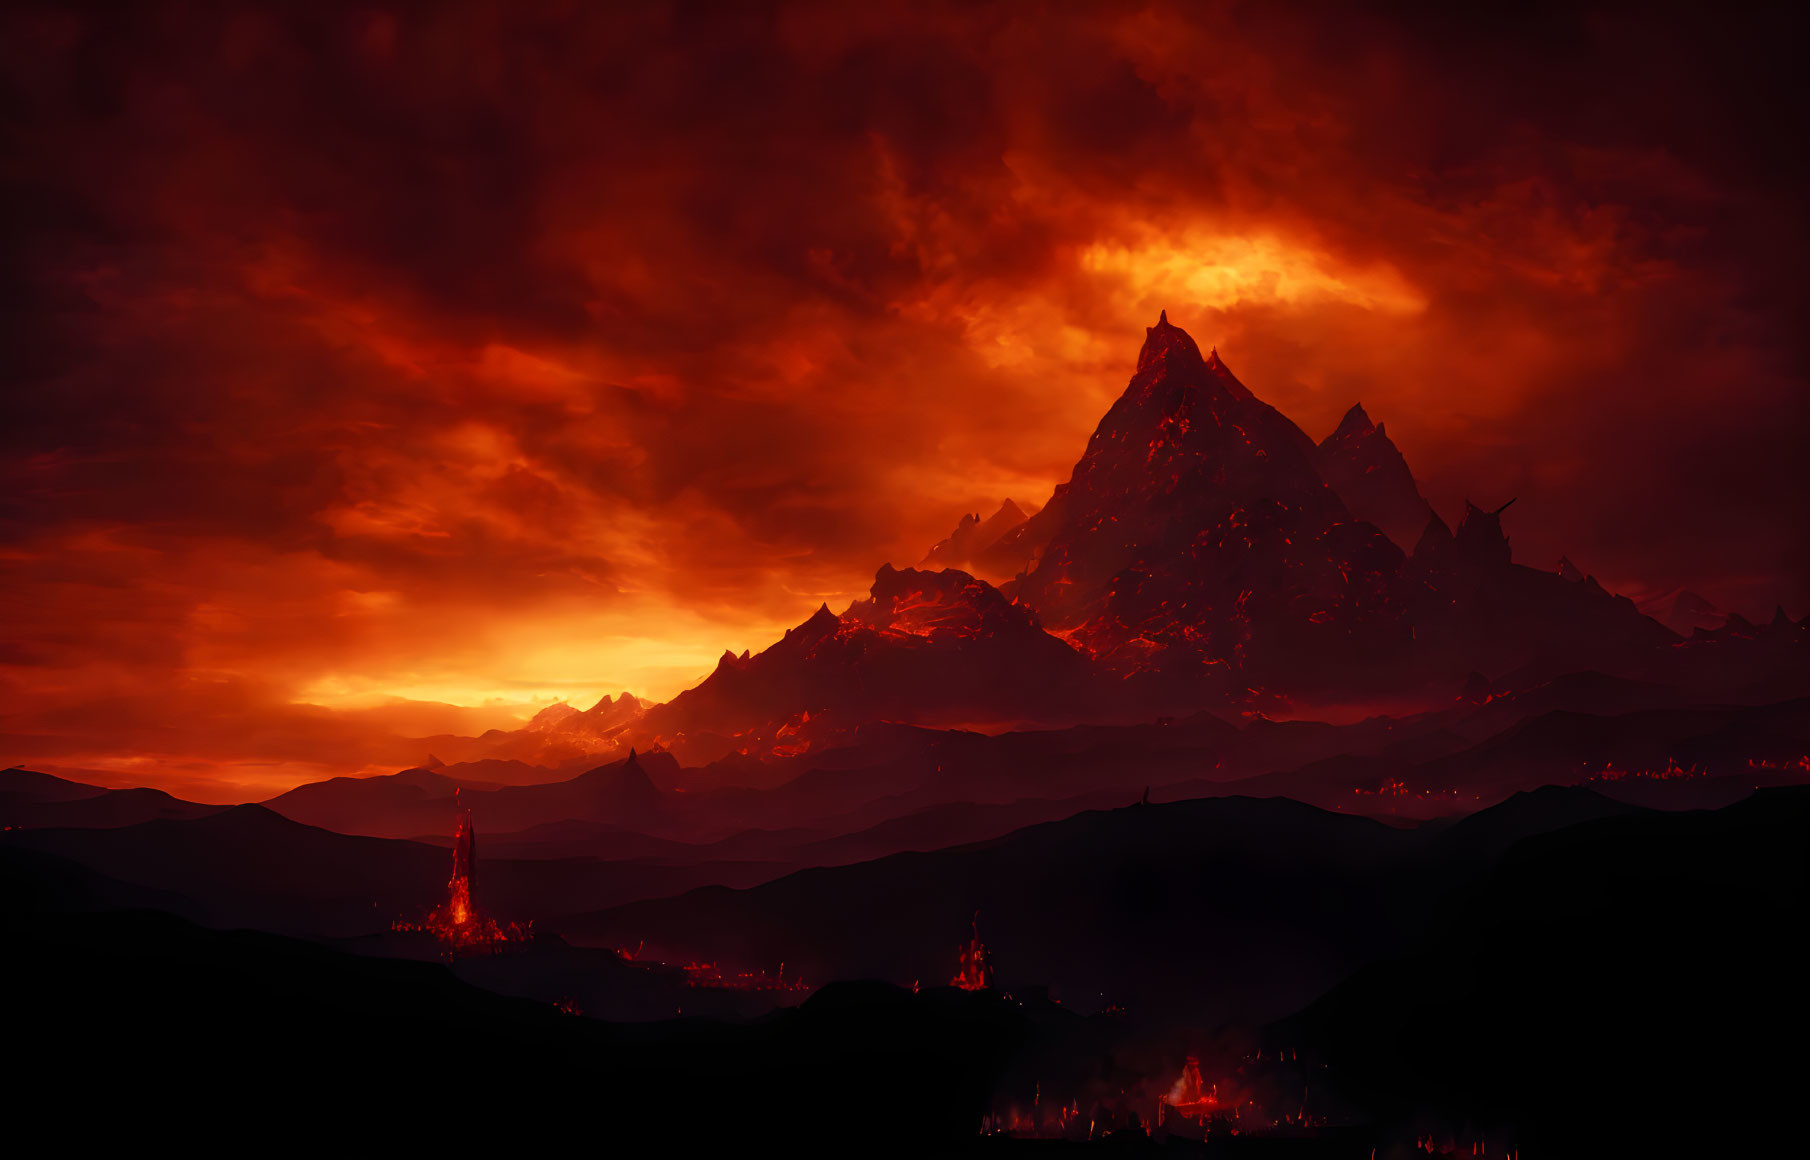 Vibrant red and black landscape with silhouetted mountains and fiery sky.